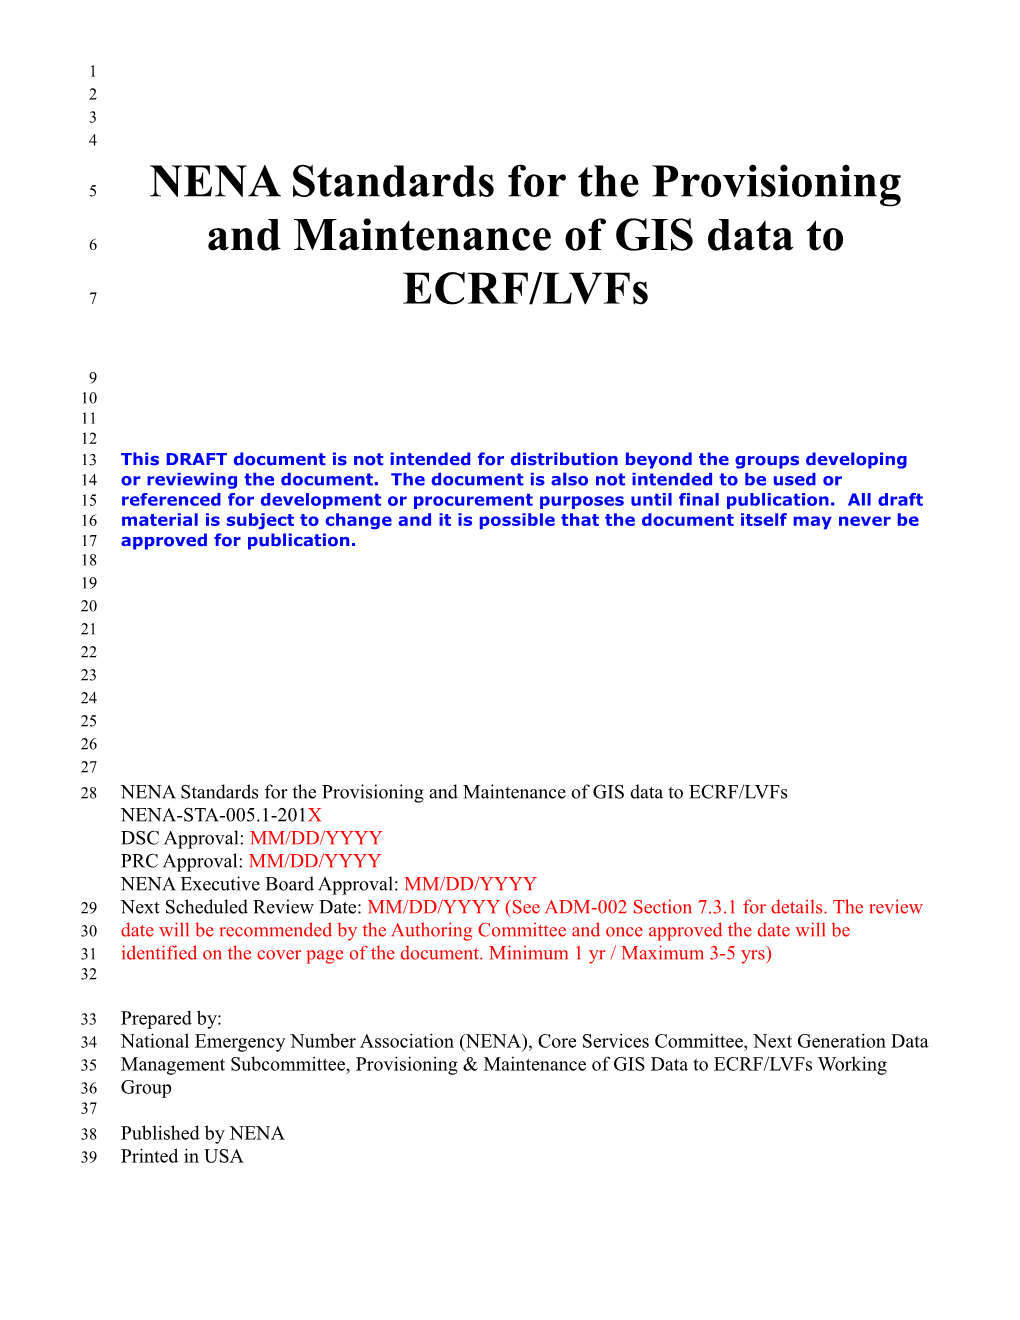 NENA Standards for the Provisioning and Maintenance of GIS Data to ECRF/Lvfs